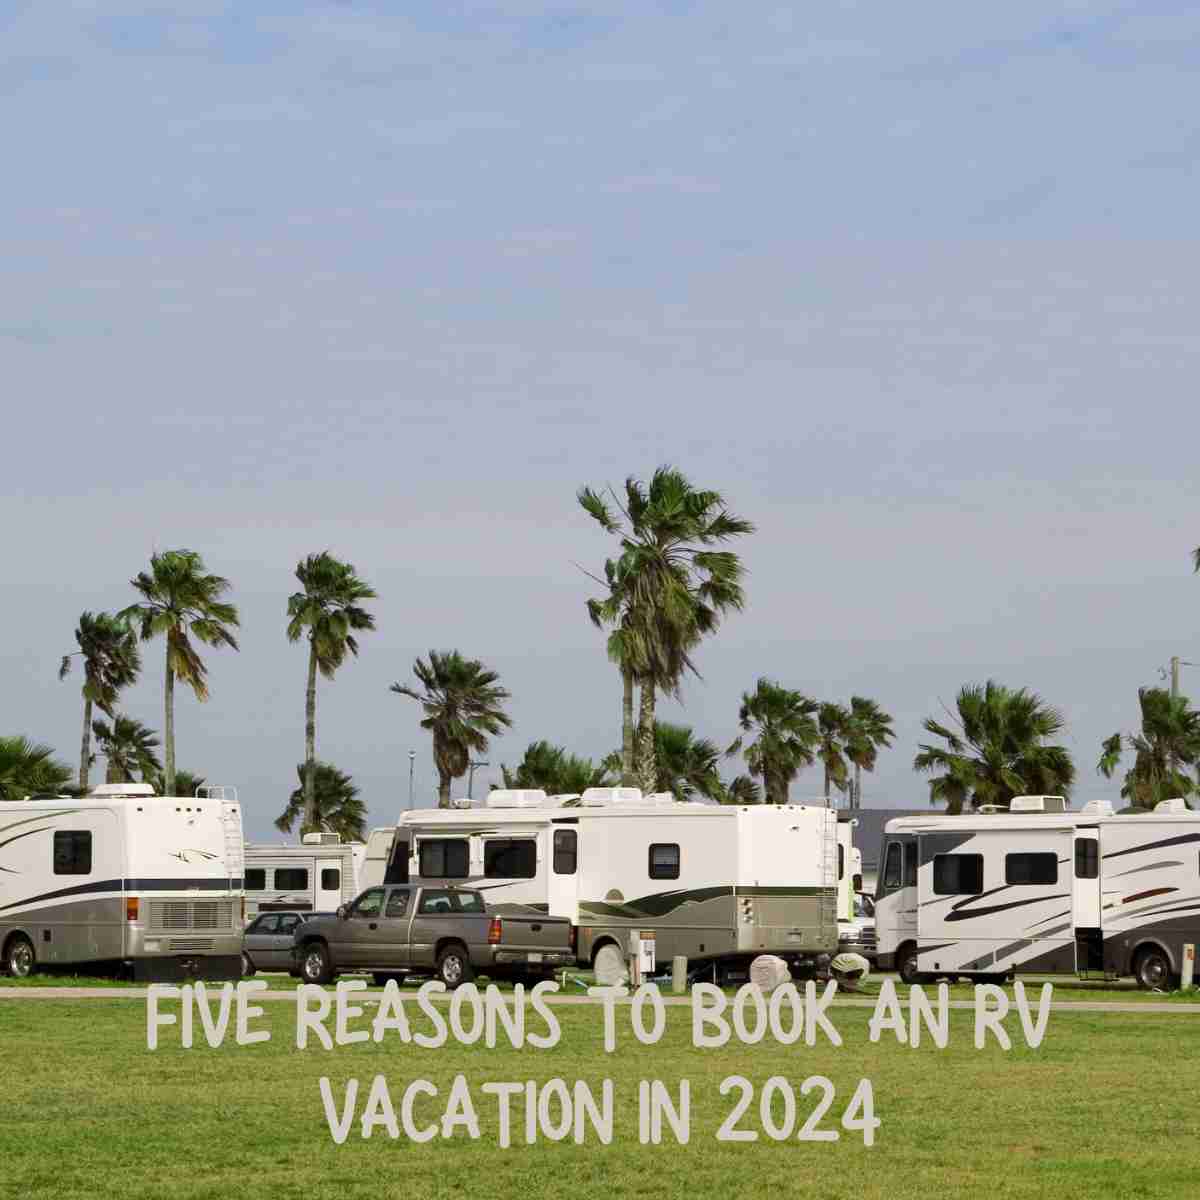 Book an RV Vacation